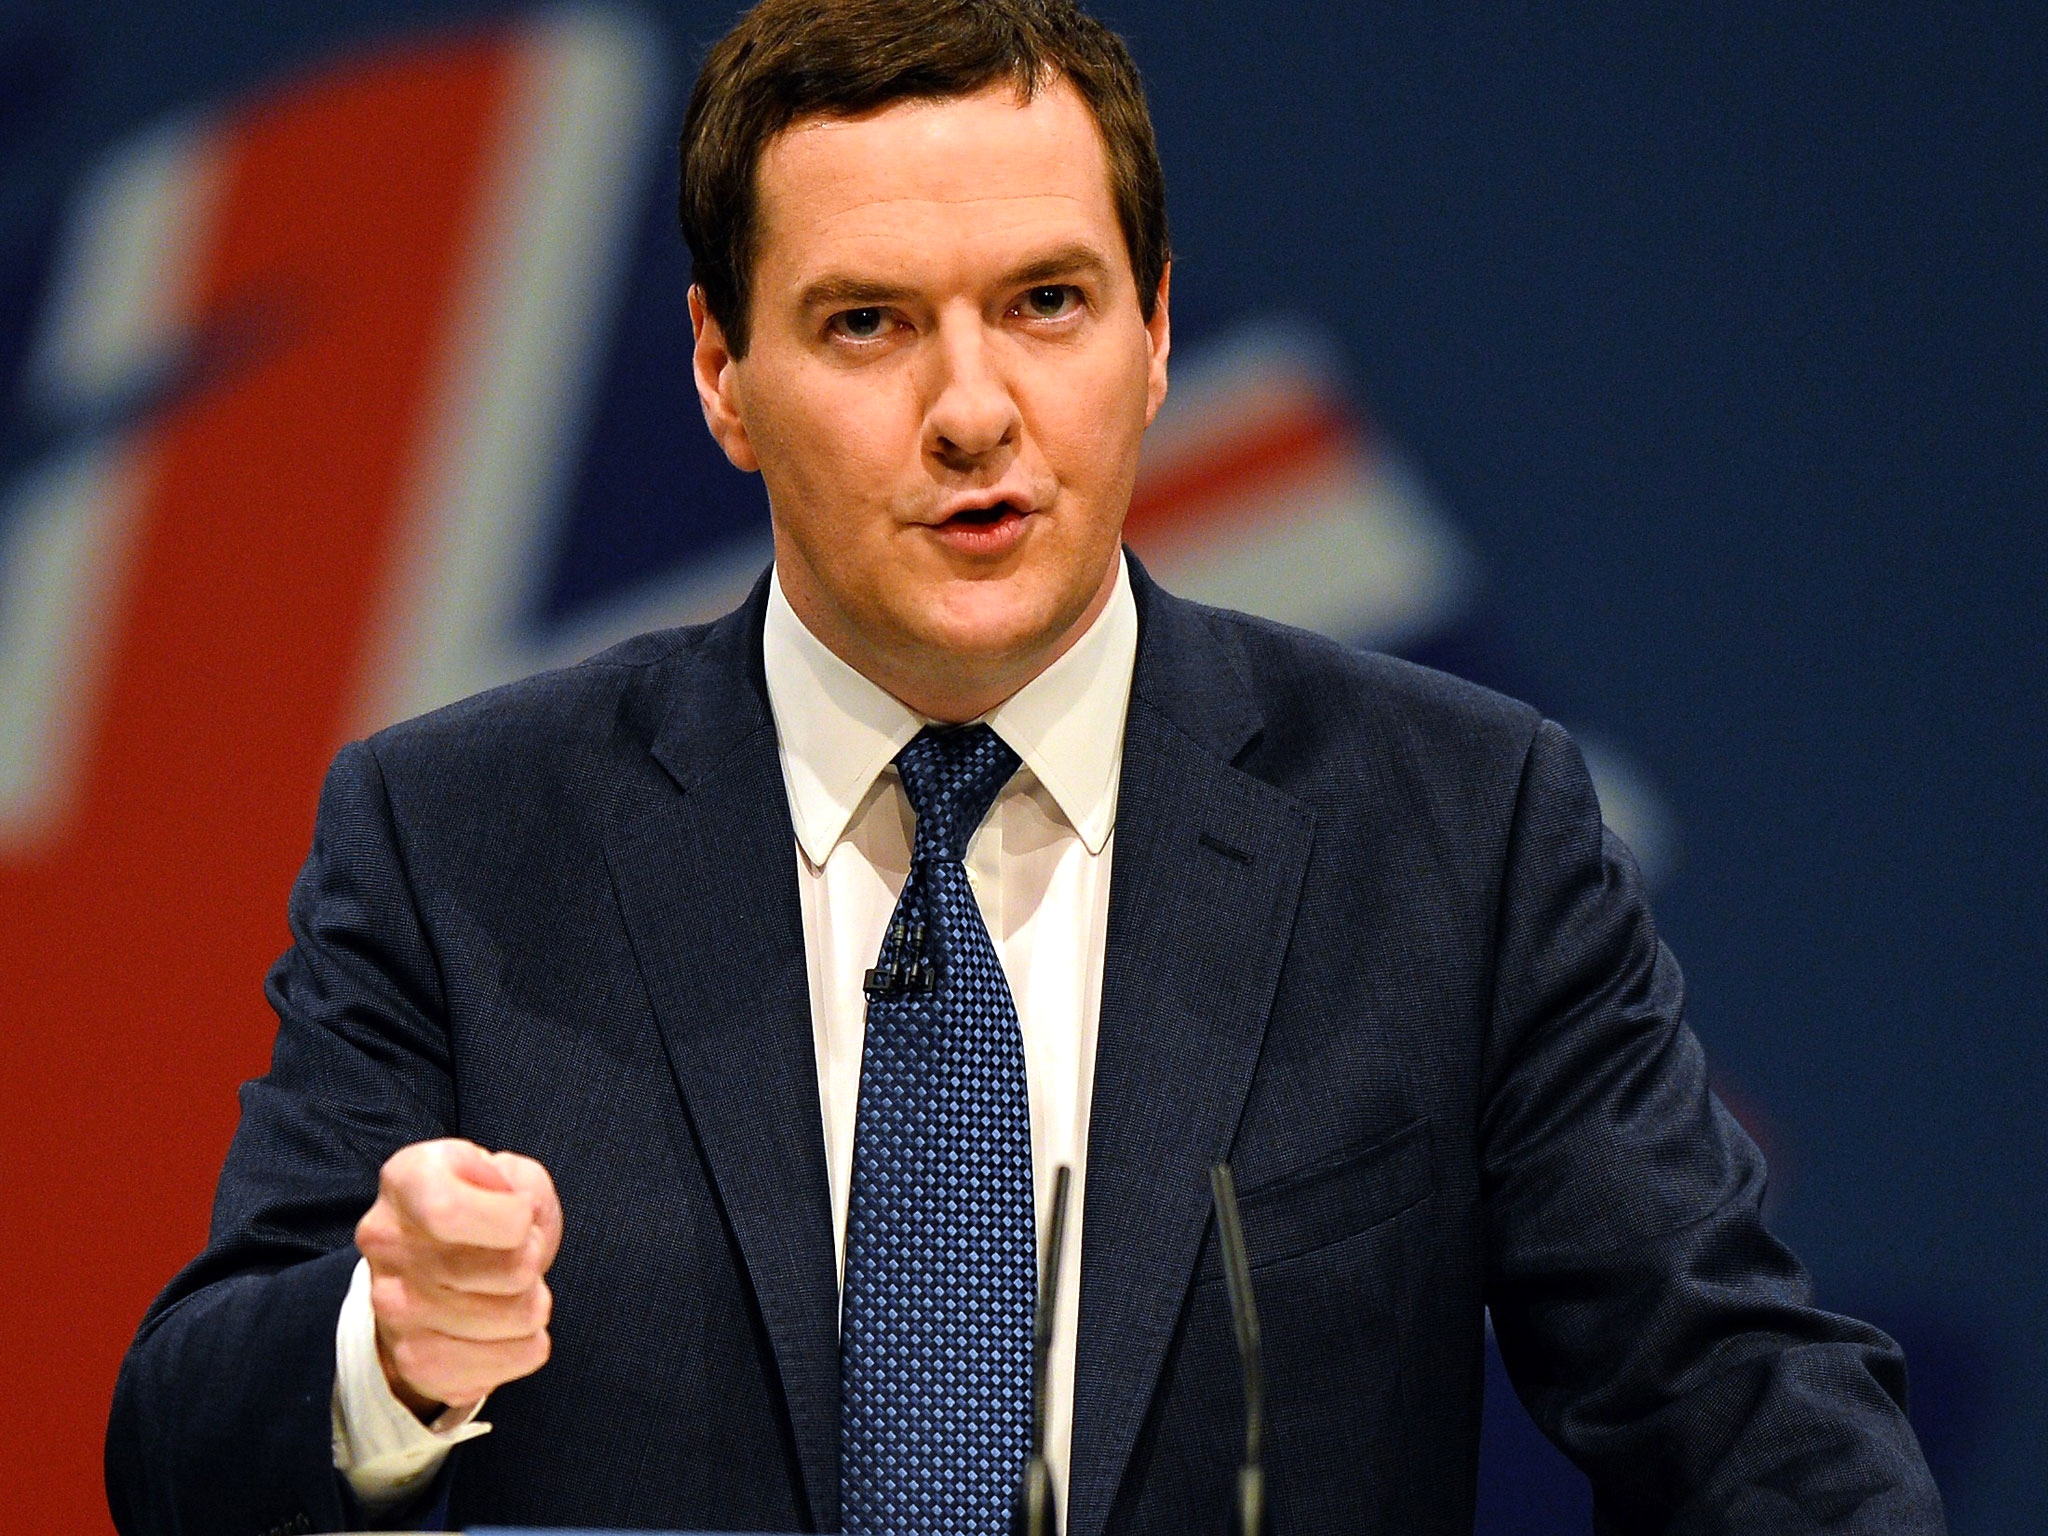 Olivier Blanchard noted that Osborne could have picked up growth sooner